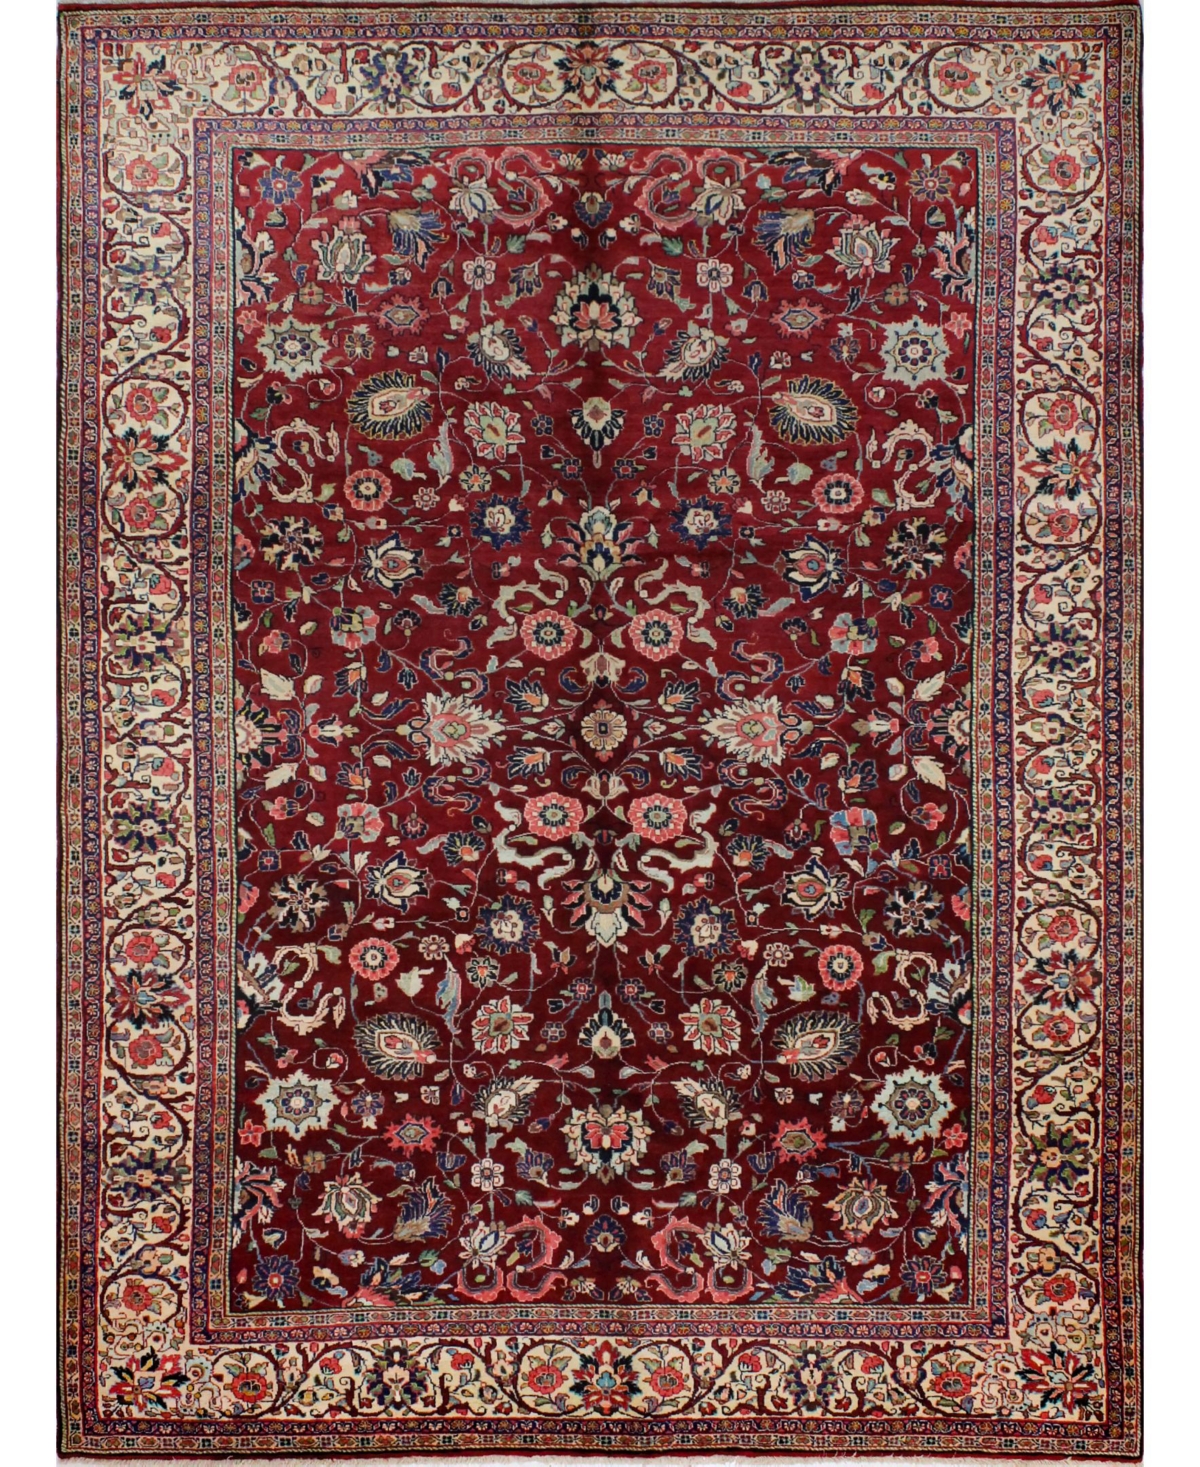 Bb Rugs One of a Kind Sarouk 6'11in x 10'3in Area Rug - Red